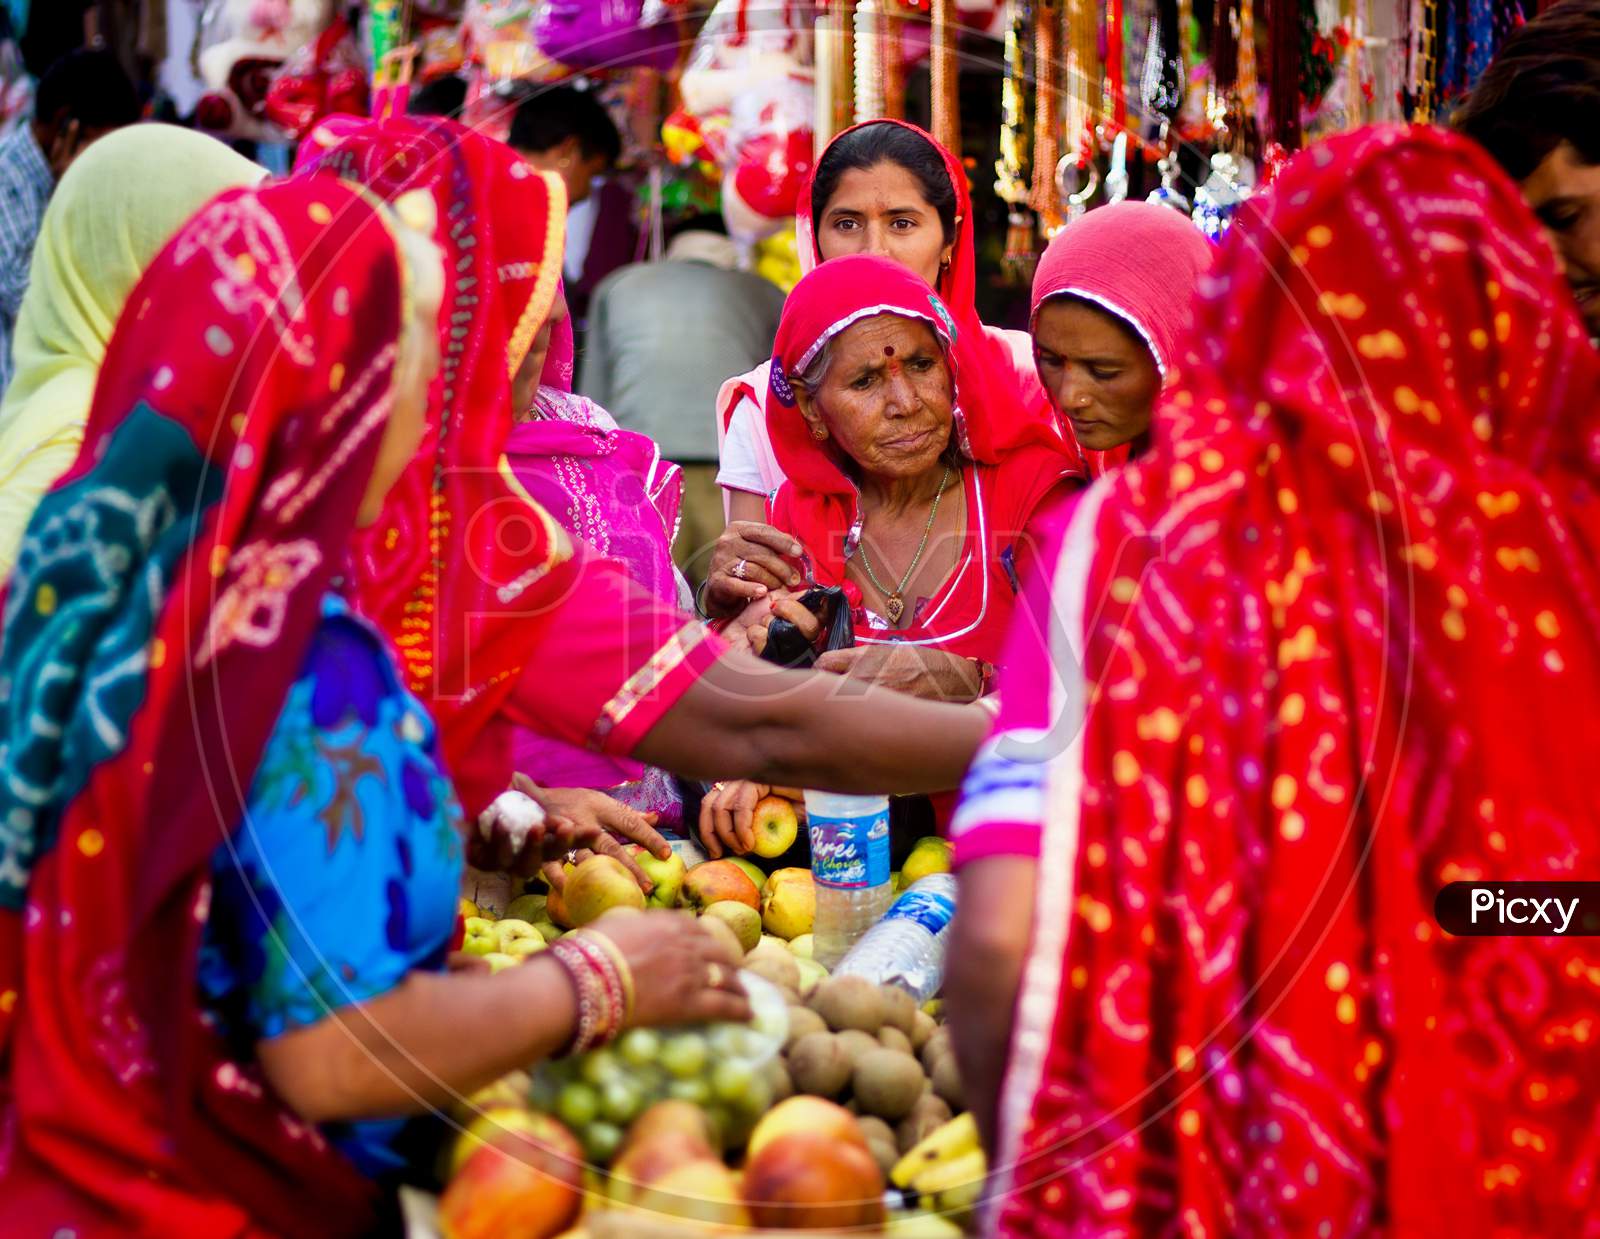 Pushkar, India - November 10, 2016: Few Indian Women In Colorful Saree While Covering Their Head Buying Fruits In Group In The State Of Rajasthan